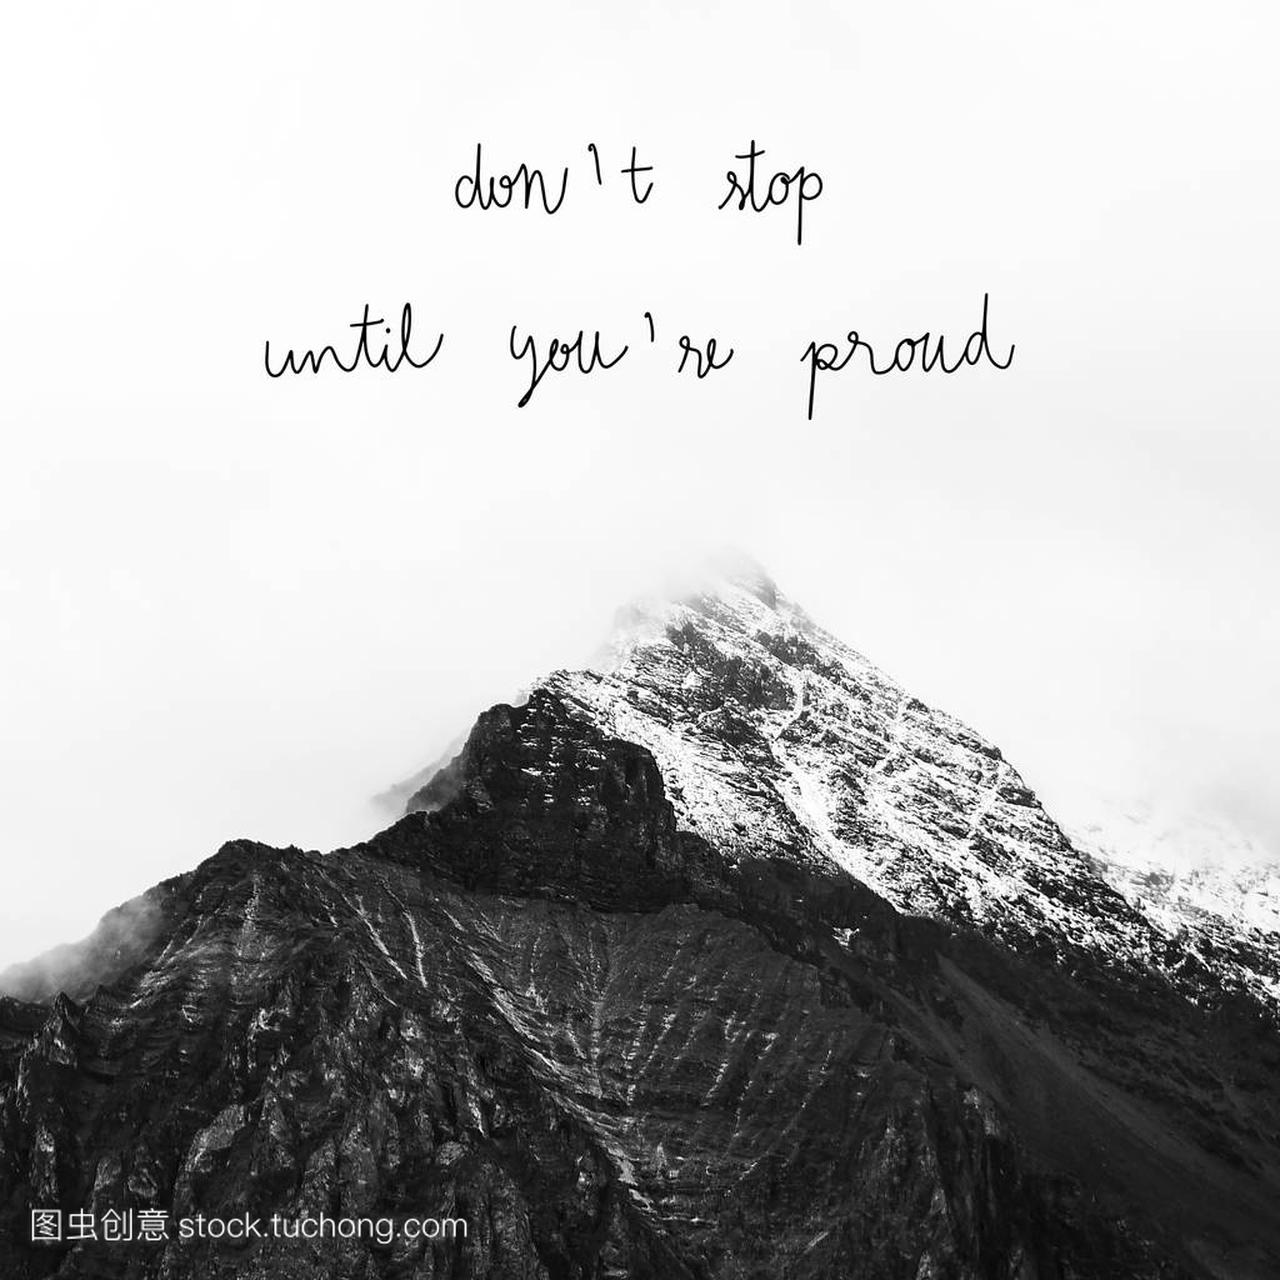 Dont stop until you re proud. Inspirational quote